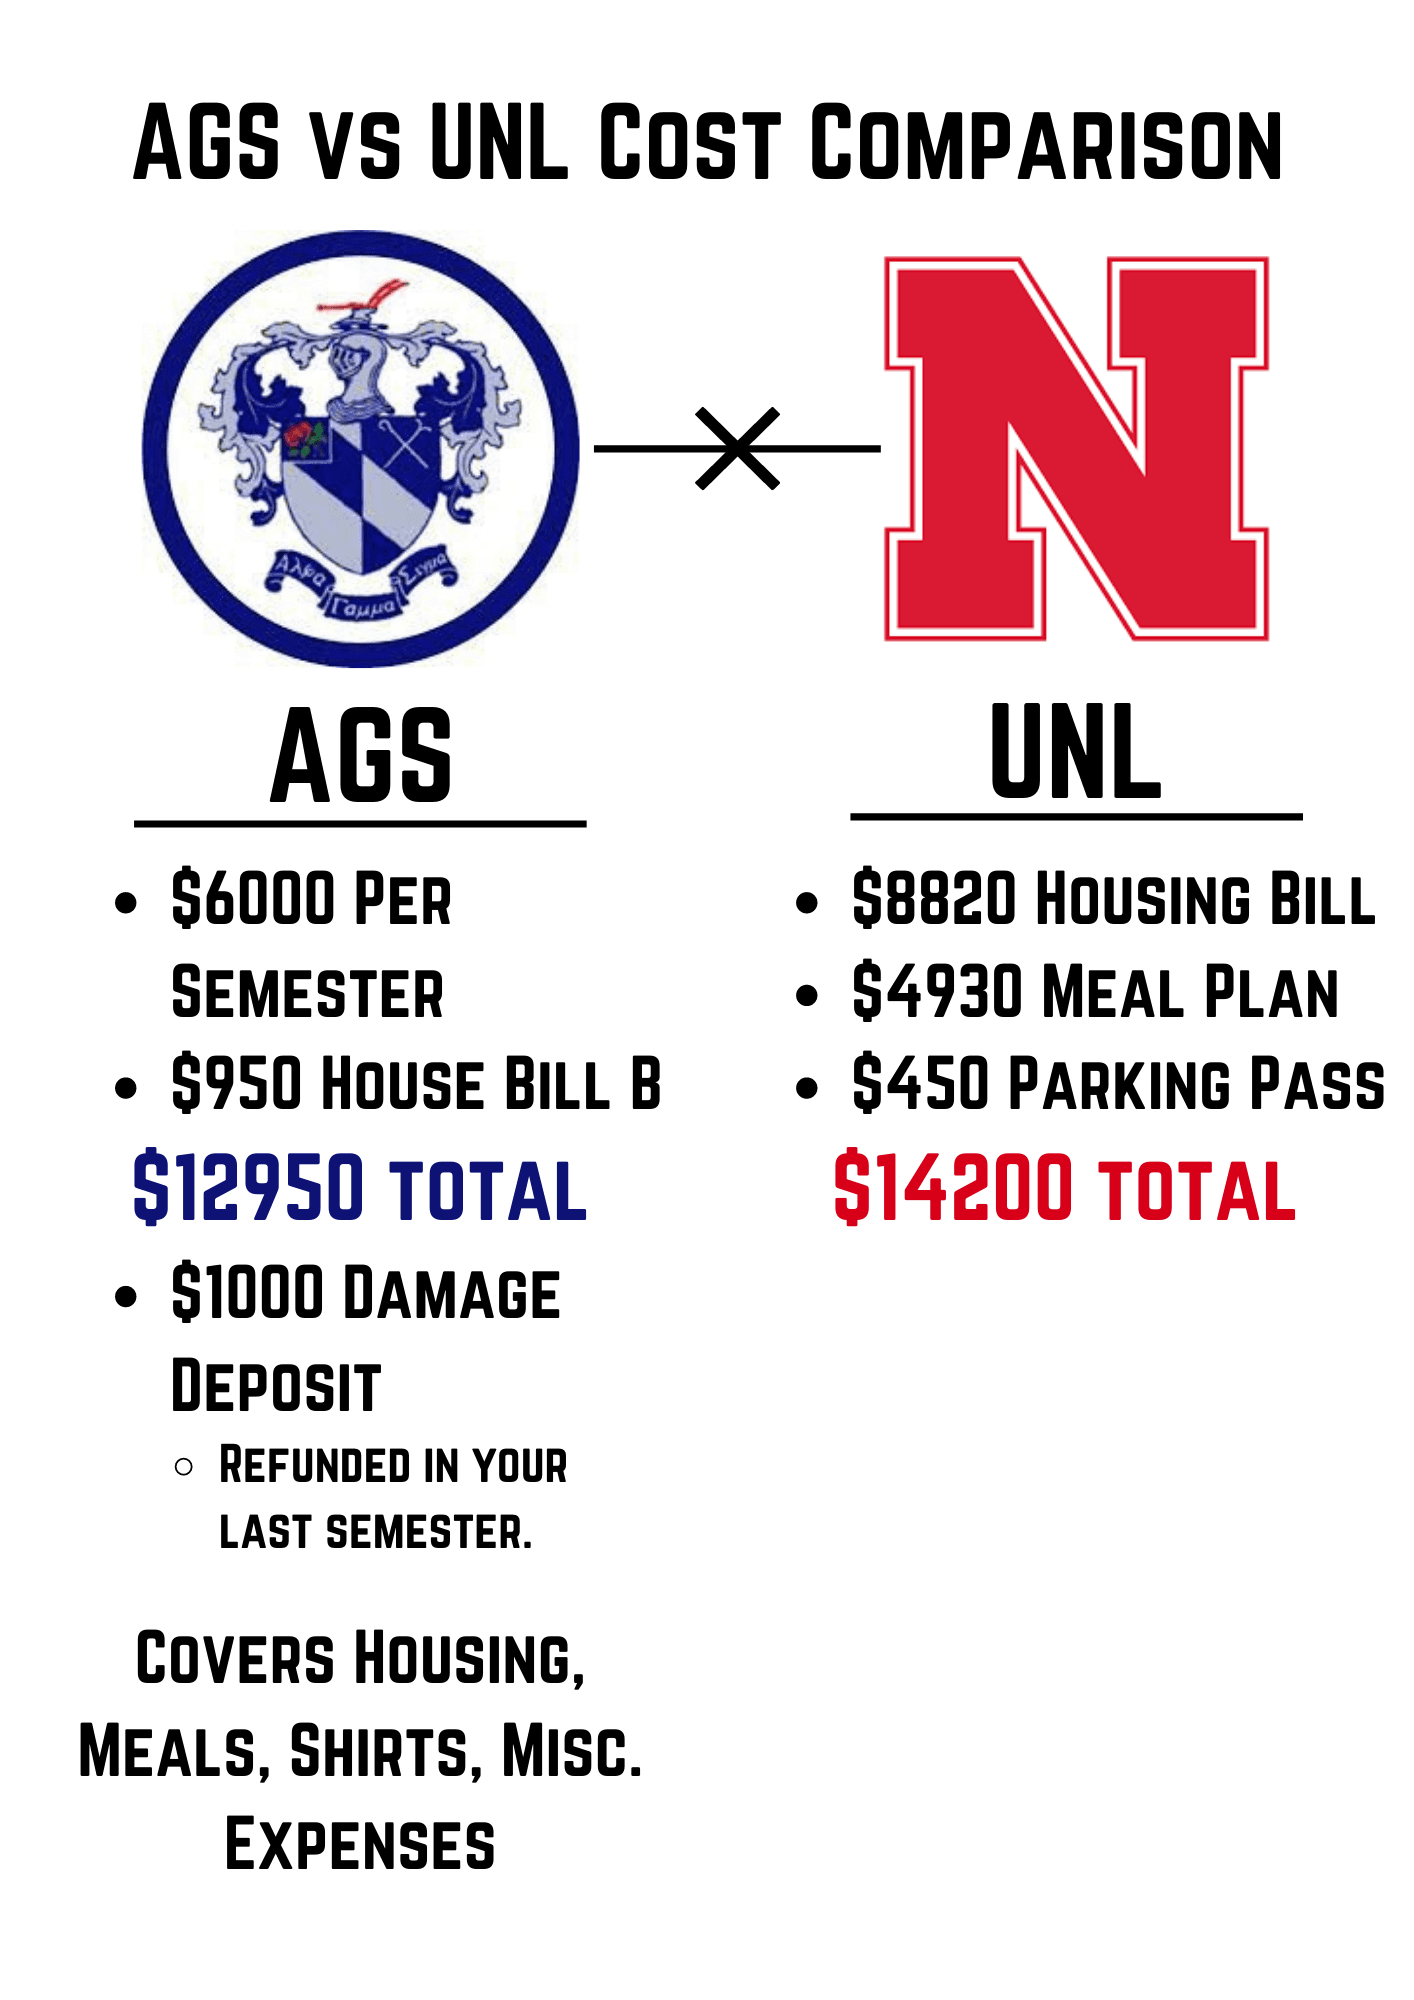 Click here to view AGS vs UNL housing comparison